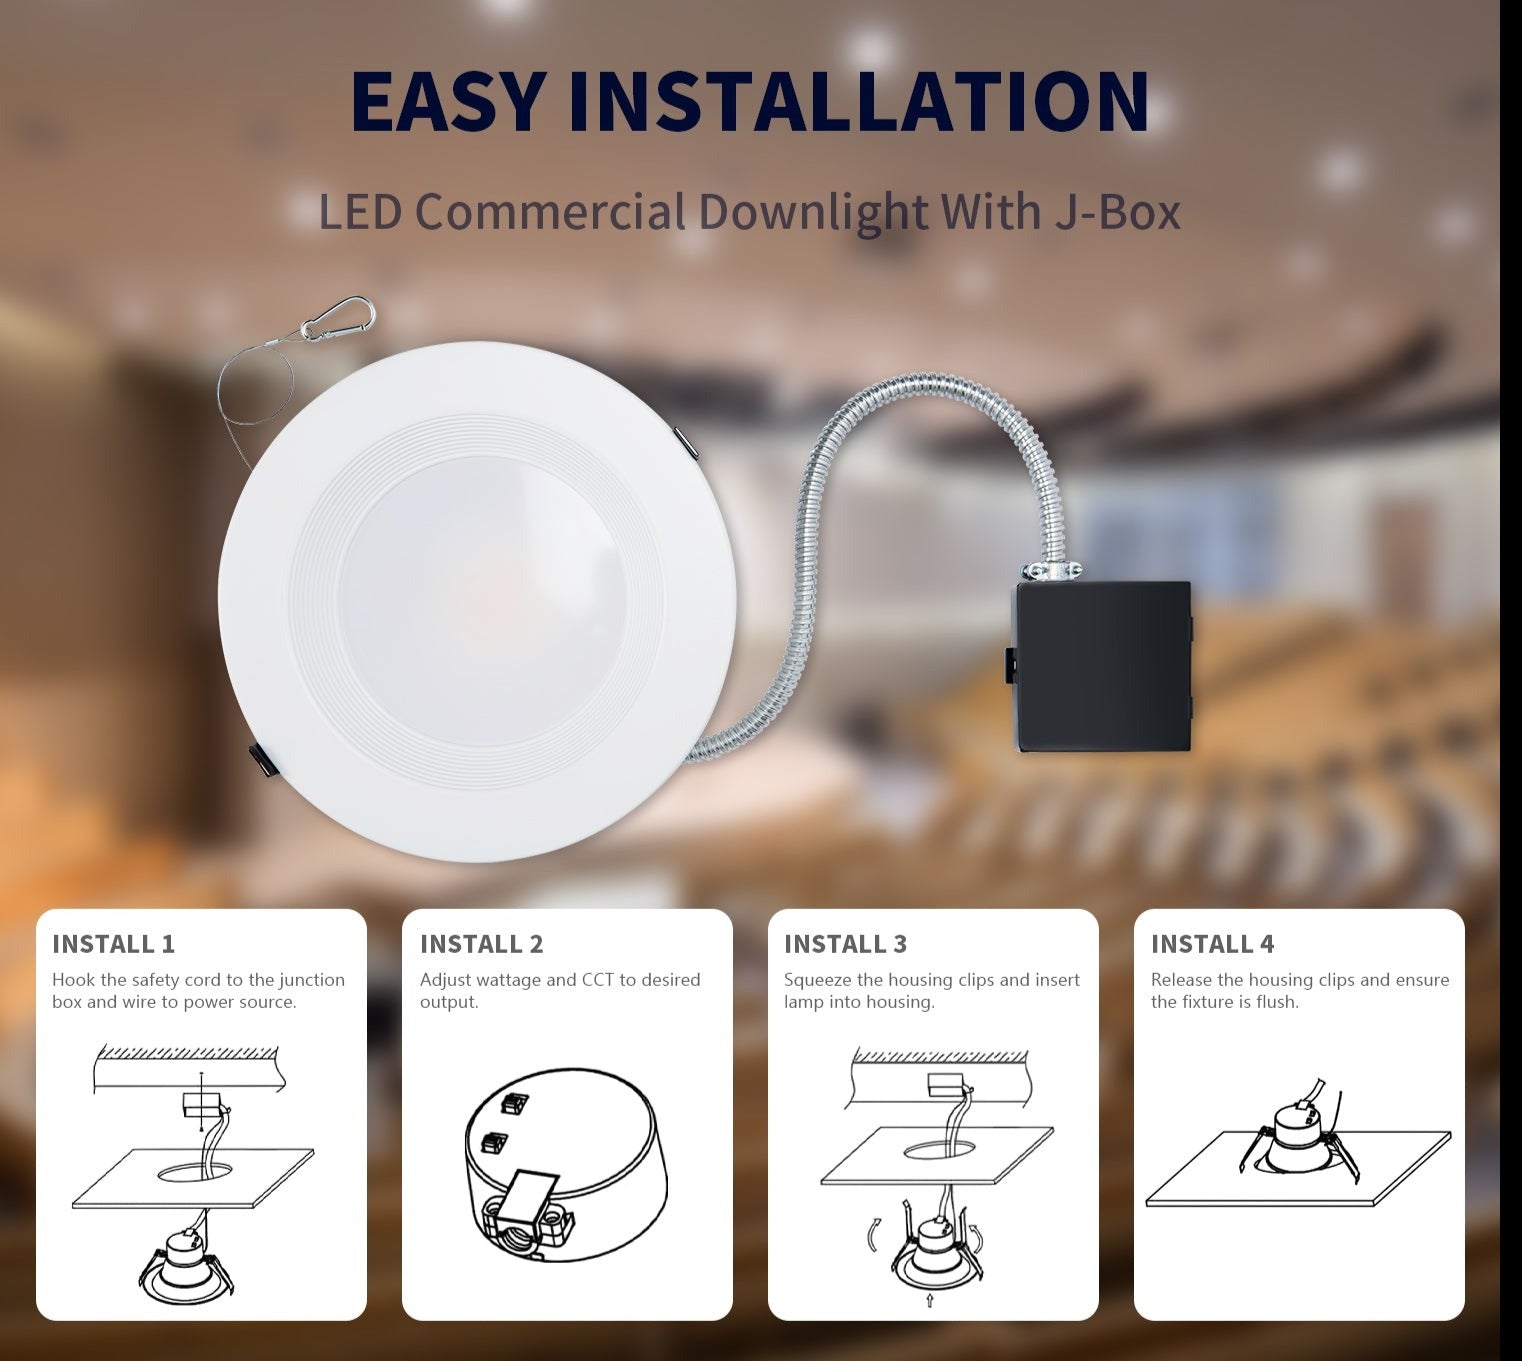 10 Inch Recessed LED Downlight with Junction Box - Selectable Wattage(22/29/37.5W) & CCT(3000K/4000K/5000K), 3700 Lumens, 0-10V Dimming - ETL & Energy Star Listed - Eco LED Lightings 